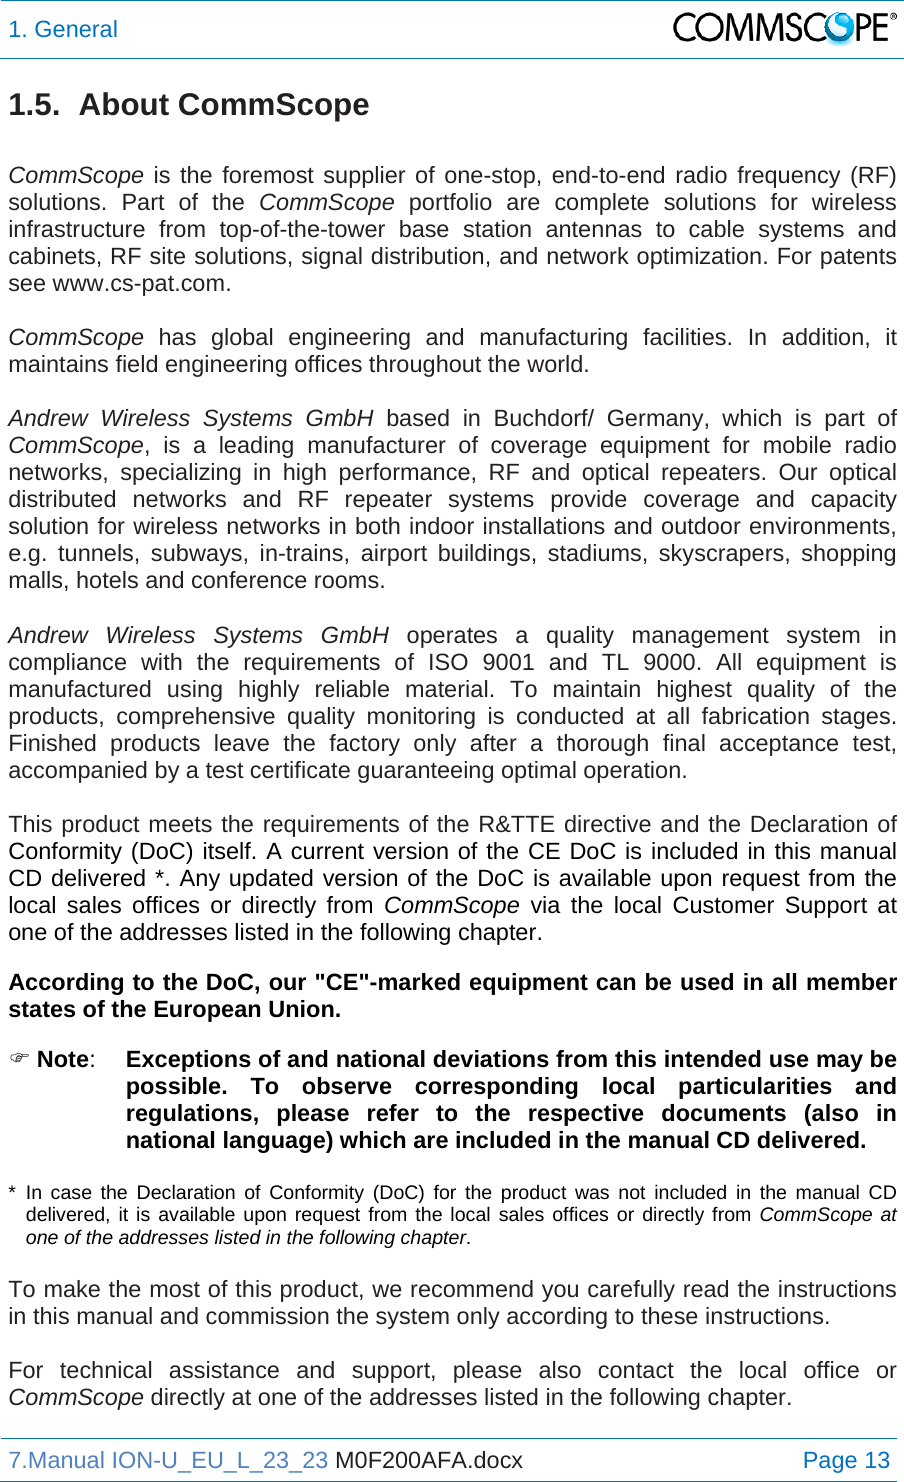 1. General  7.Manual ION-U_EU_L_23_23 M0F200AFA.docx Page 13 1.5. About CommScope  CommScope is the foremost supplier of one-stop, end-to-end radio frequency (RF) solutions. Part of the CommScope portfolio are complete solutions for wireless infrastructure from top-of-the-tower base station antennas to cable systems and cabinets, RF site solutions, signal distribution, and network optimization. For patents see www.cs-pat.com.  CommScope  has global engineering and manufacturing facilities. In addition, it maintains field engineering offices throughout the world.  Andrew Wireless Systems GmbH based in Buchdorf/ Germany, which is part of CommScope, is a leading manufacturer of coverage equipment for mobile radio networks, specializing in high performance, RF and optical repeaters. Our optical distributed networks and RF repeater systems provide coverage and capacity solution for wireless networks in both indoor installations and outdoor environments, e.g. tunnels, subways, in-trains, airport buildings, stadiums, skyscrapers, shopping malls, hotels and conference rooms.   Andrew Wireless Systems GmbH operates a quality management system in compliance with the requirements of ISO 9001 and TL 9000. All equipment is manufactured using highly reliable material. To maintain highest quality of the products, comprehensive quality monitoring is conducted at all fabrication stages. Finished products leave the factory only after a thorough final acceptance test, accompanied by a test certificate guaranteeing optimal operation.  This product meets the requirements of the R&amp;TTE directive and the Declaration of Conformity (DoC) itself. A current version of the CE DoC is included in this manual CD delivered *. Any updated version of the DoC is available upon request from the local sales offices or directly from CommScope via the local Customer Support at one of the addresses listed in the following chapter.  According to the DoC, our &quot;CE&quot;-marked equipment can be used in all member states of the European Union.  Note:  Exceptions of and national deviations from this intended use may be possible. To observe corresponding local particularities and regulations, please refer to the respective documents (also in national language) which are included in the manual CD delivered.  * In case the Declaration of Conformity (DoC) for the product was not included in the manual CD delivered, it is available upon request from the local sales offices or directly from CommScope at one of the addresses listed in the following chapter.  To make the most of this product, we recommend you carefully read the instructions in this manual and commission the system only according to these instructions.   For technical assistance and support, please also contact the local office or CommScope directly at one of the addresses listed in the following chapter.   